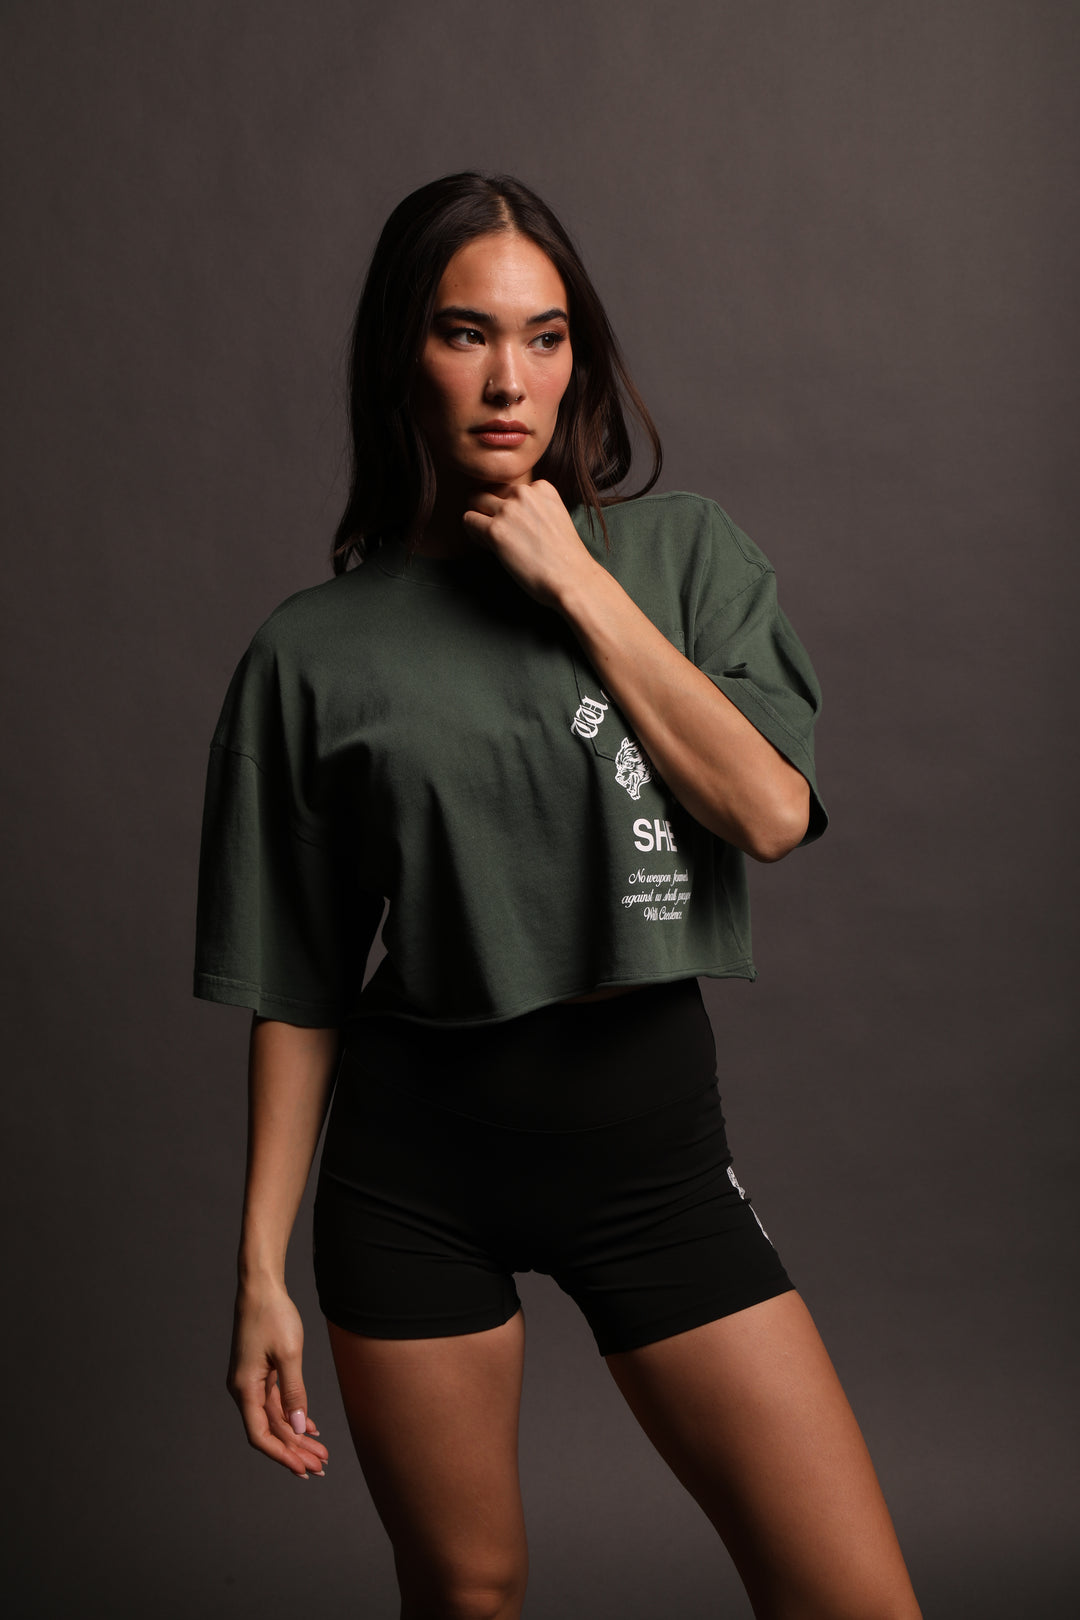 Chopper "Premium Vintage" Oversized (Cropped) Pocket Tee in Rosemary